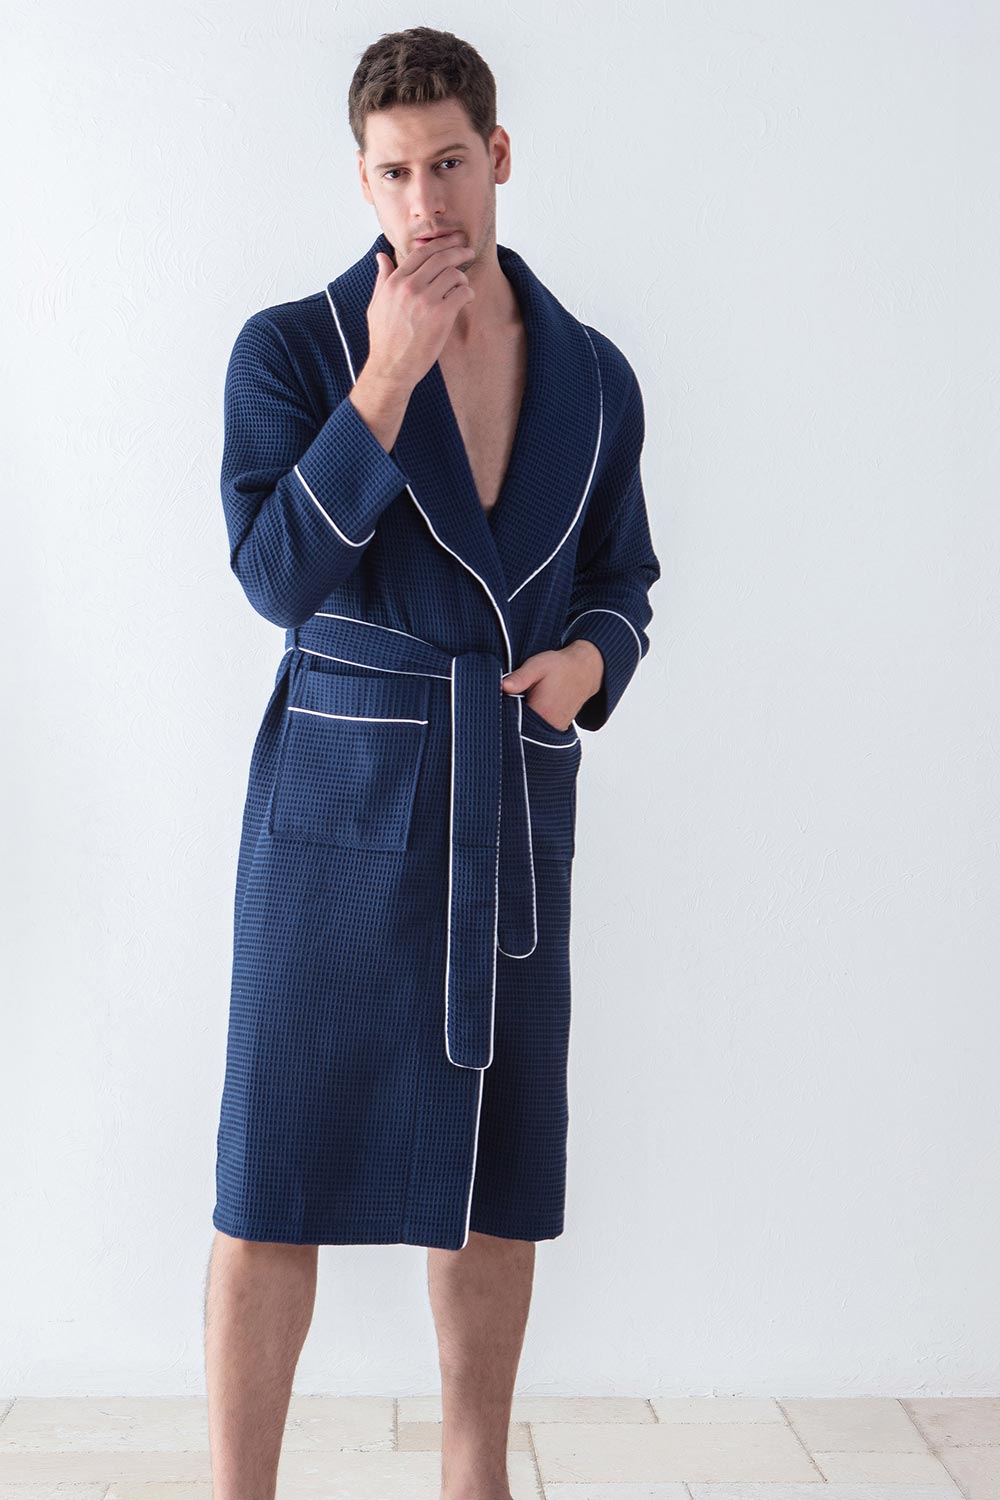 Men's Bathrobe, US Shipping only, gifts for him